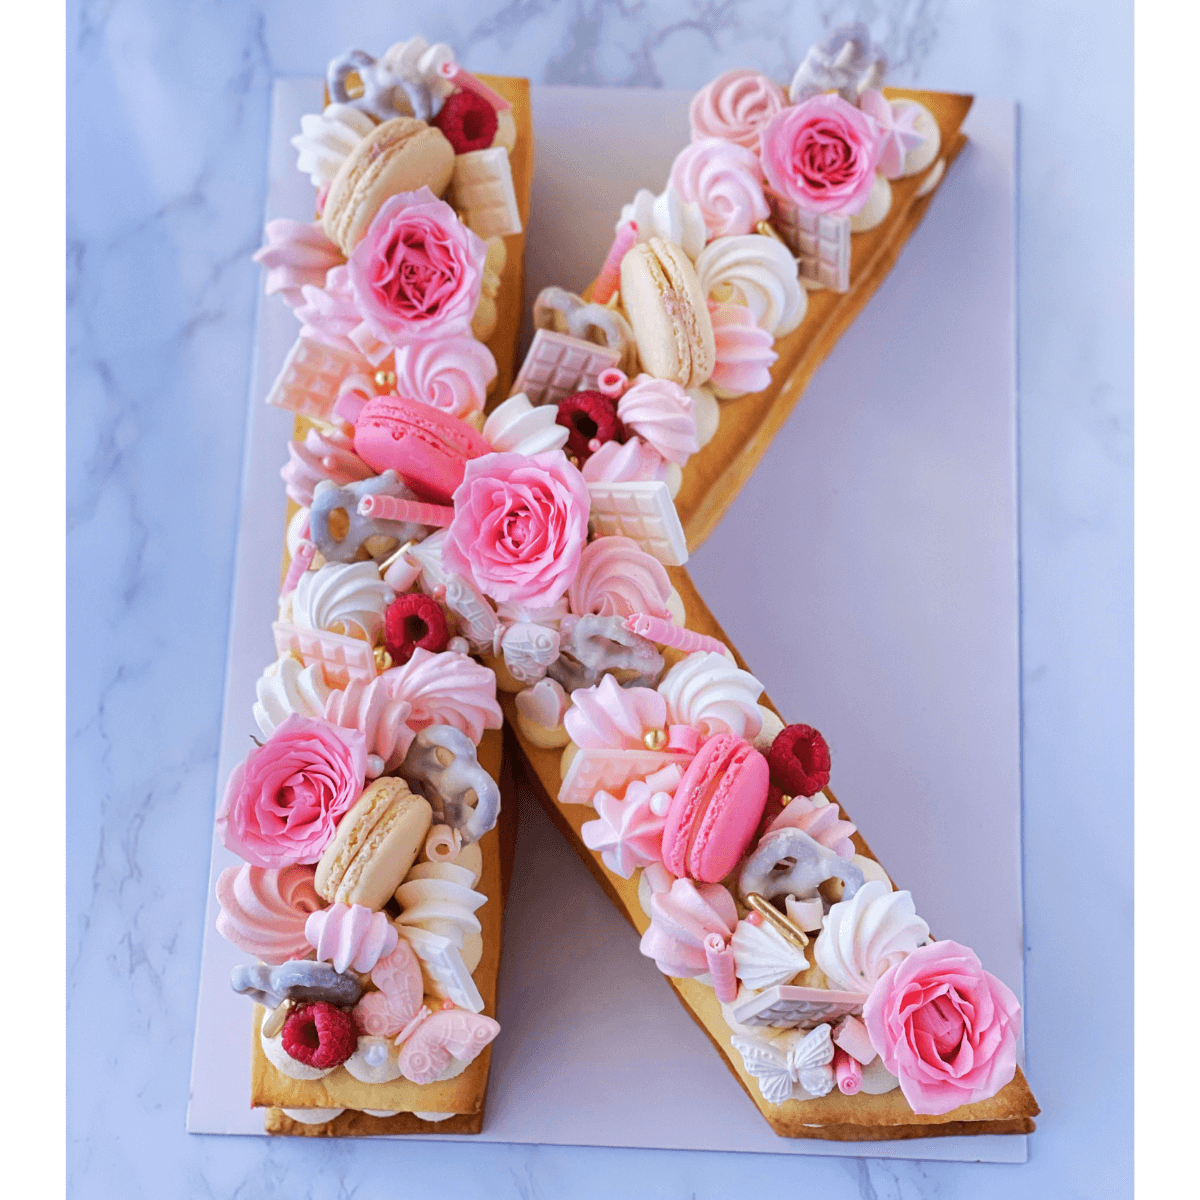 Frilly Heart Cake Delivery in Sussex | Harry Batten